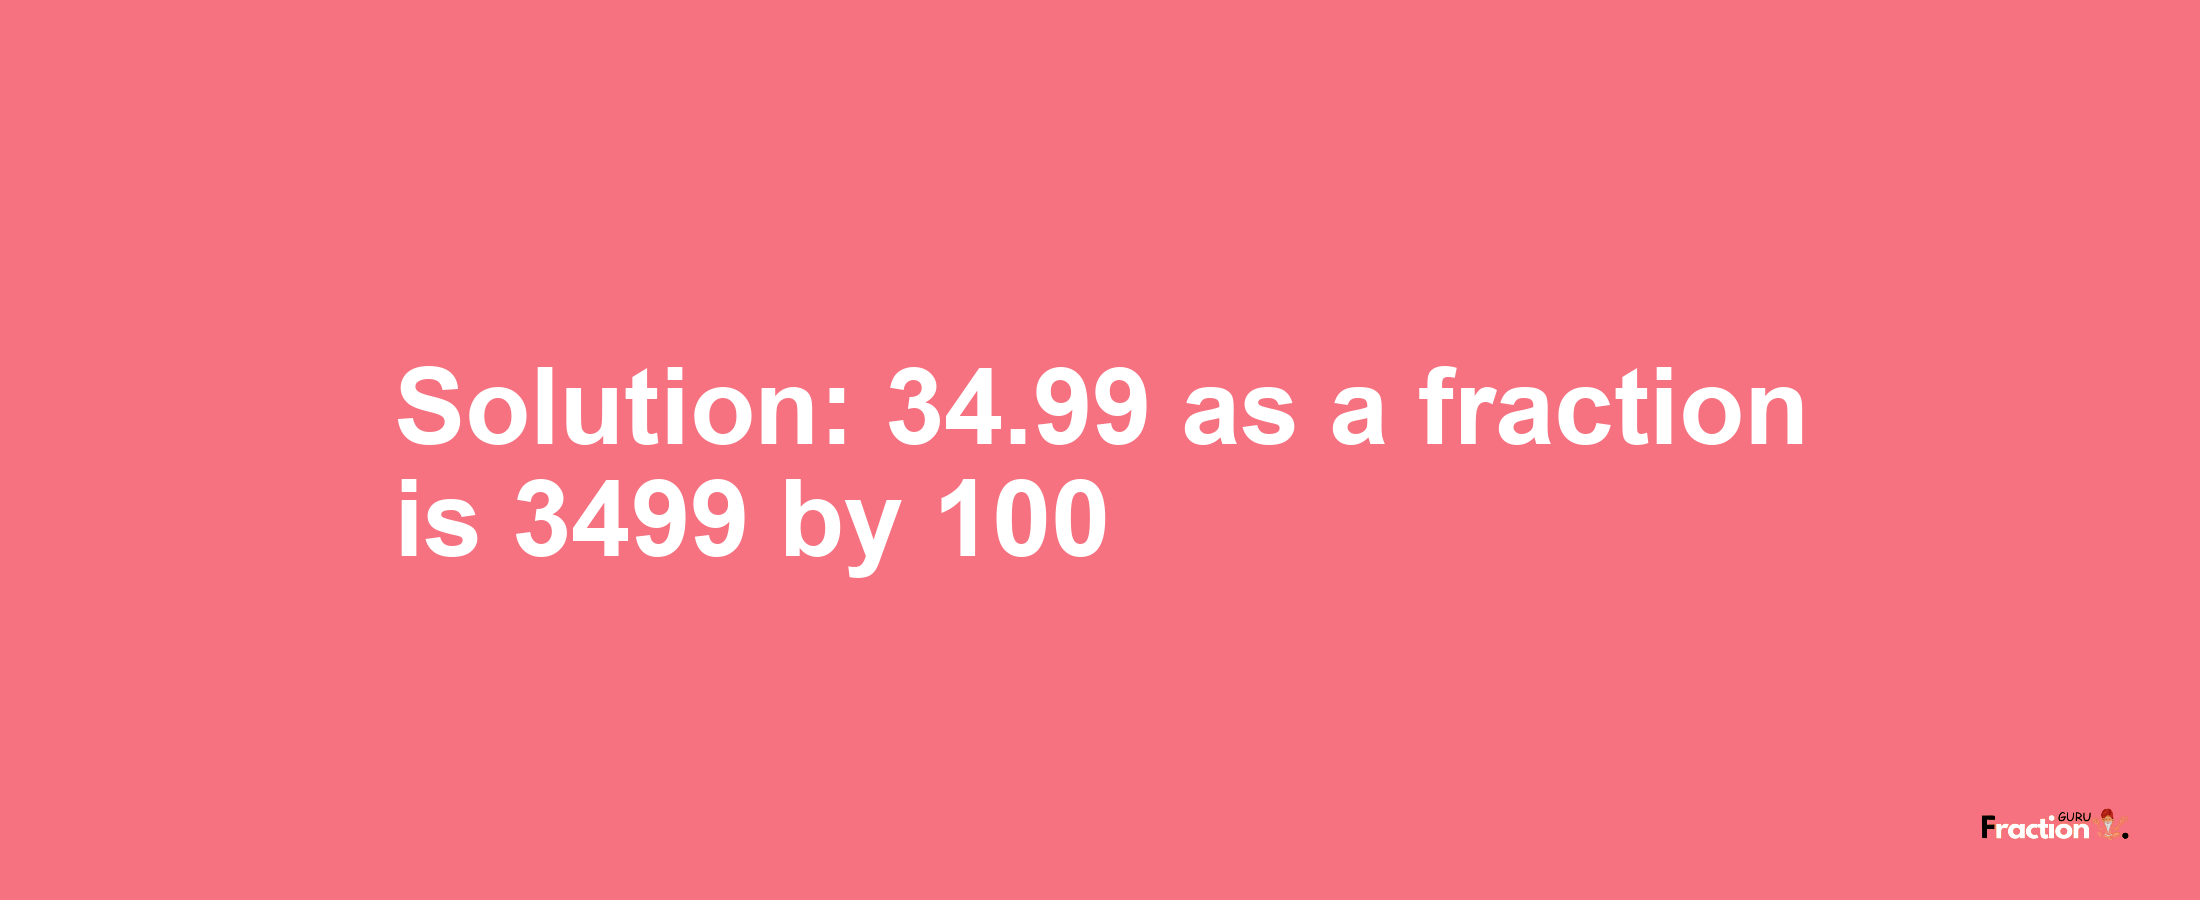 Solution:34.99 as a fraction is 3499/100